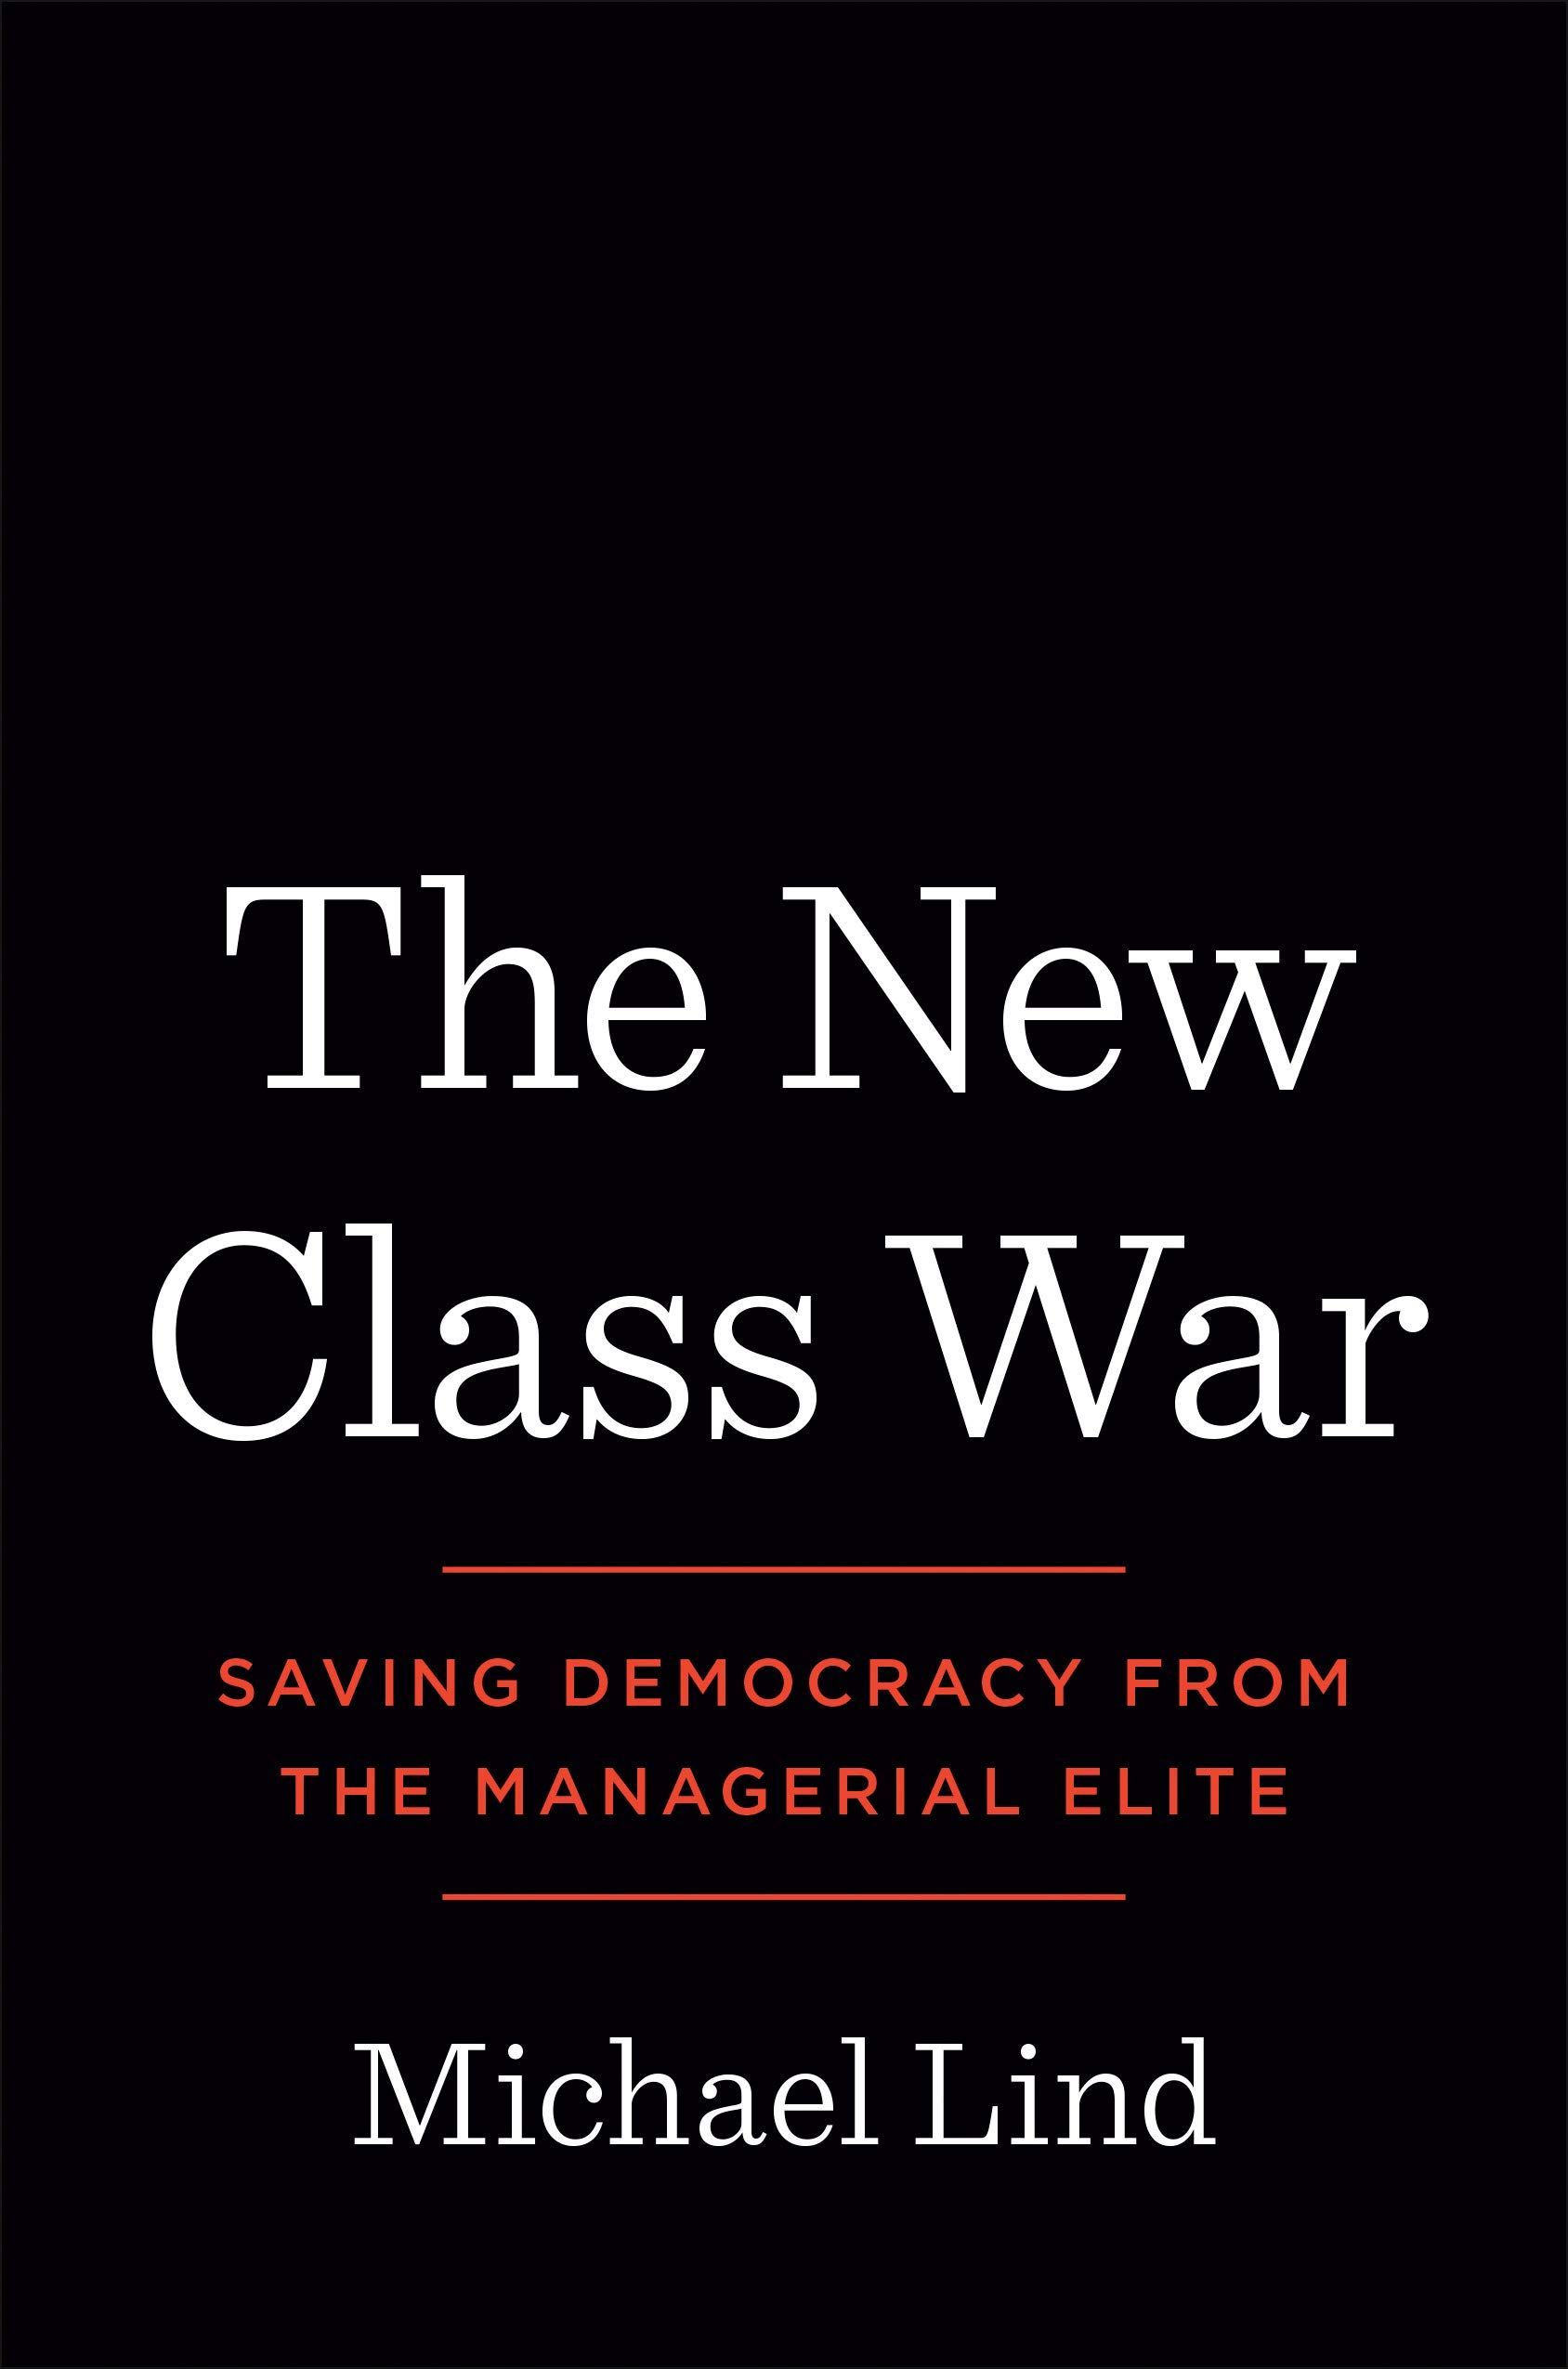 Away in a Manager: On Michael Lind’s “The New Class War”